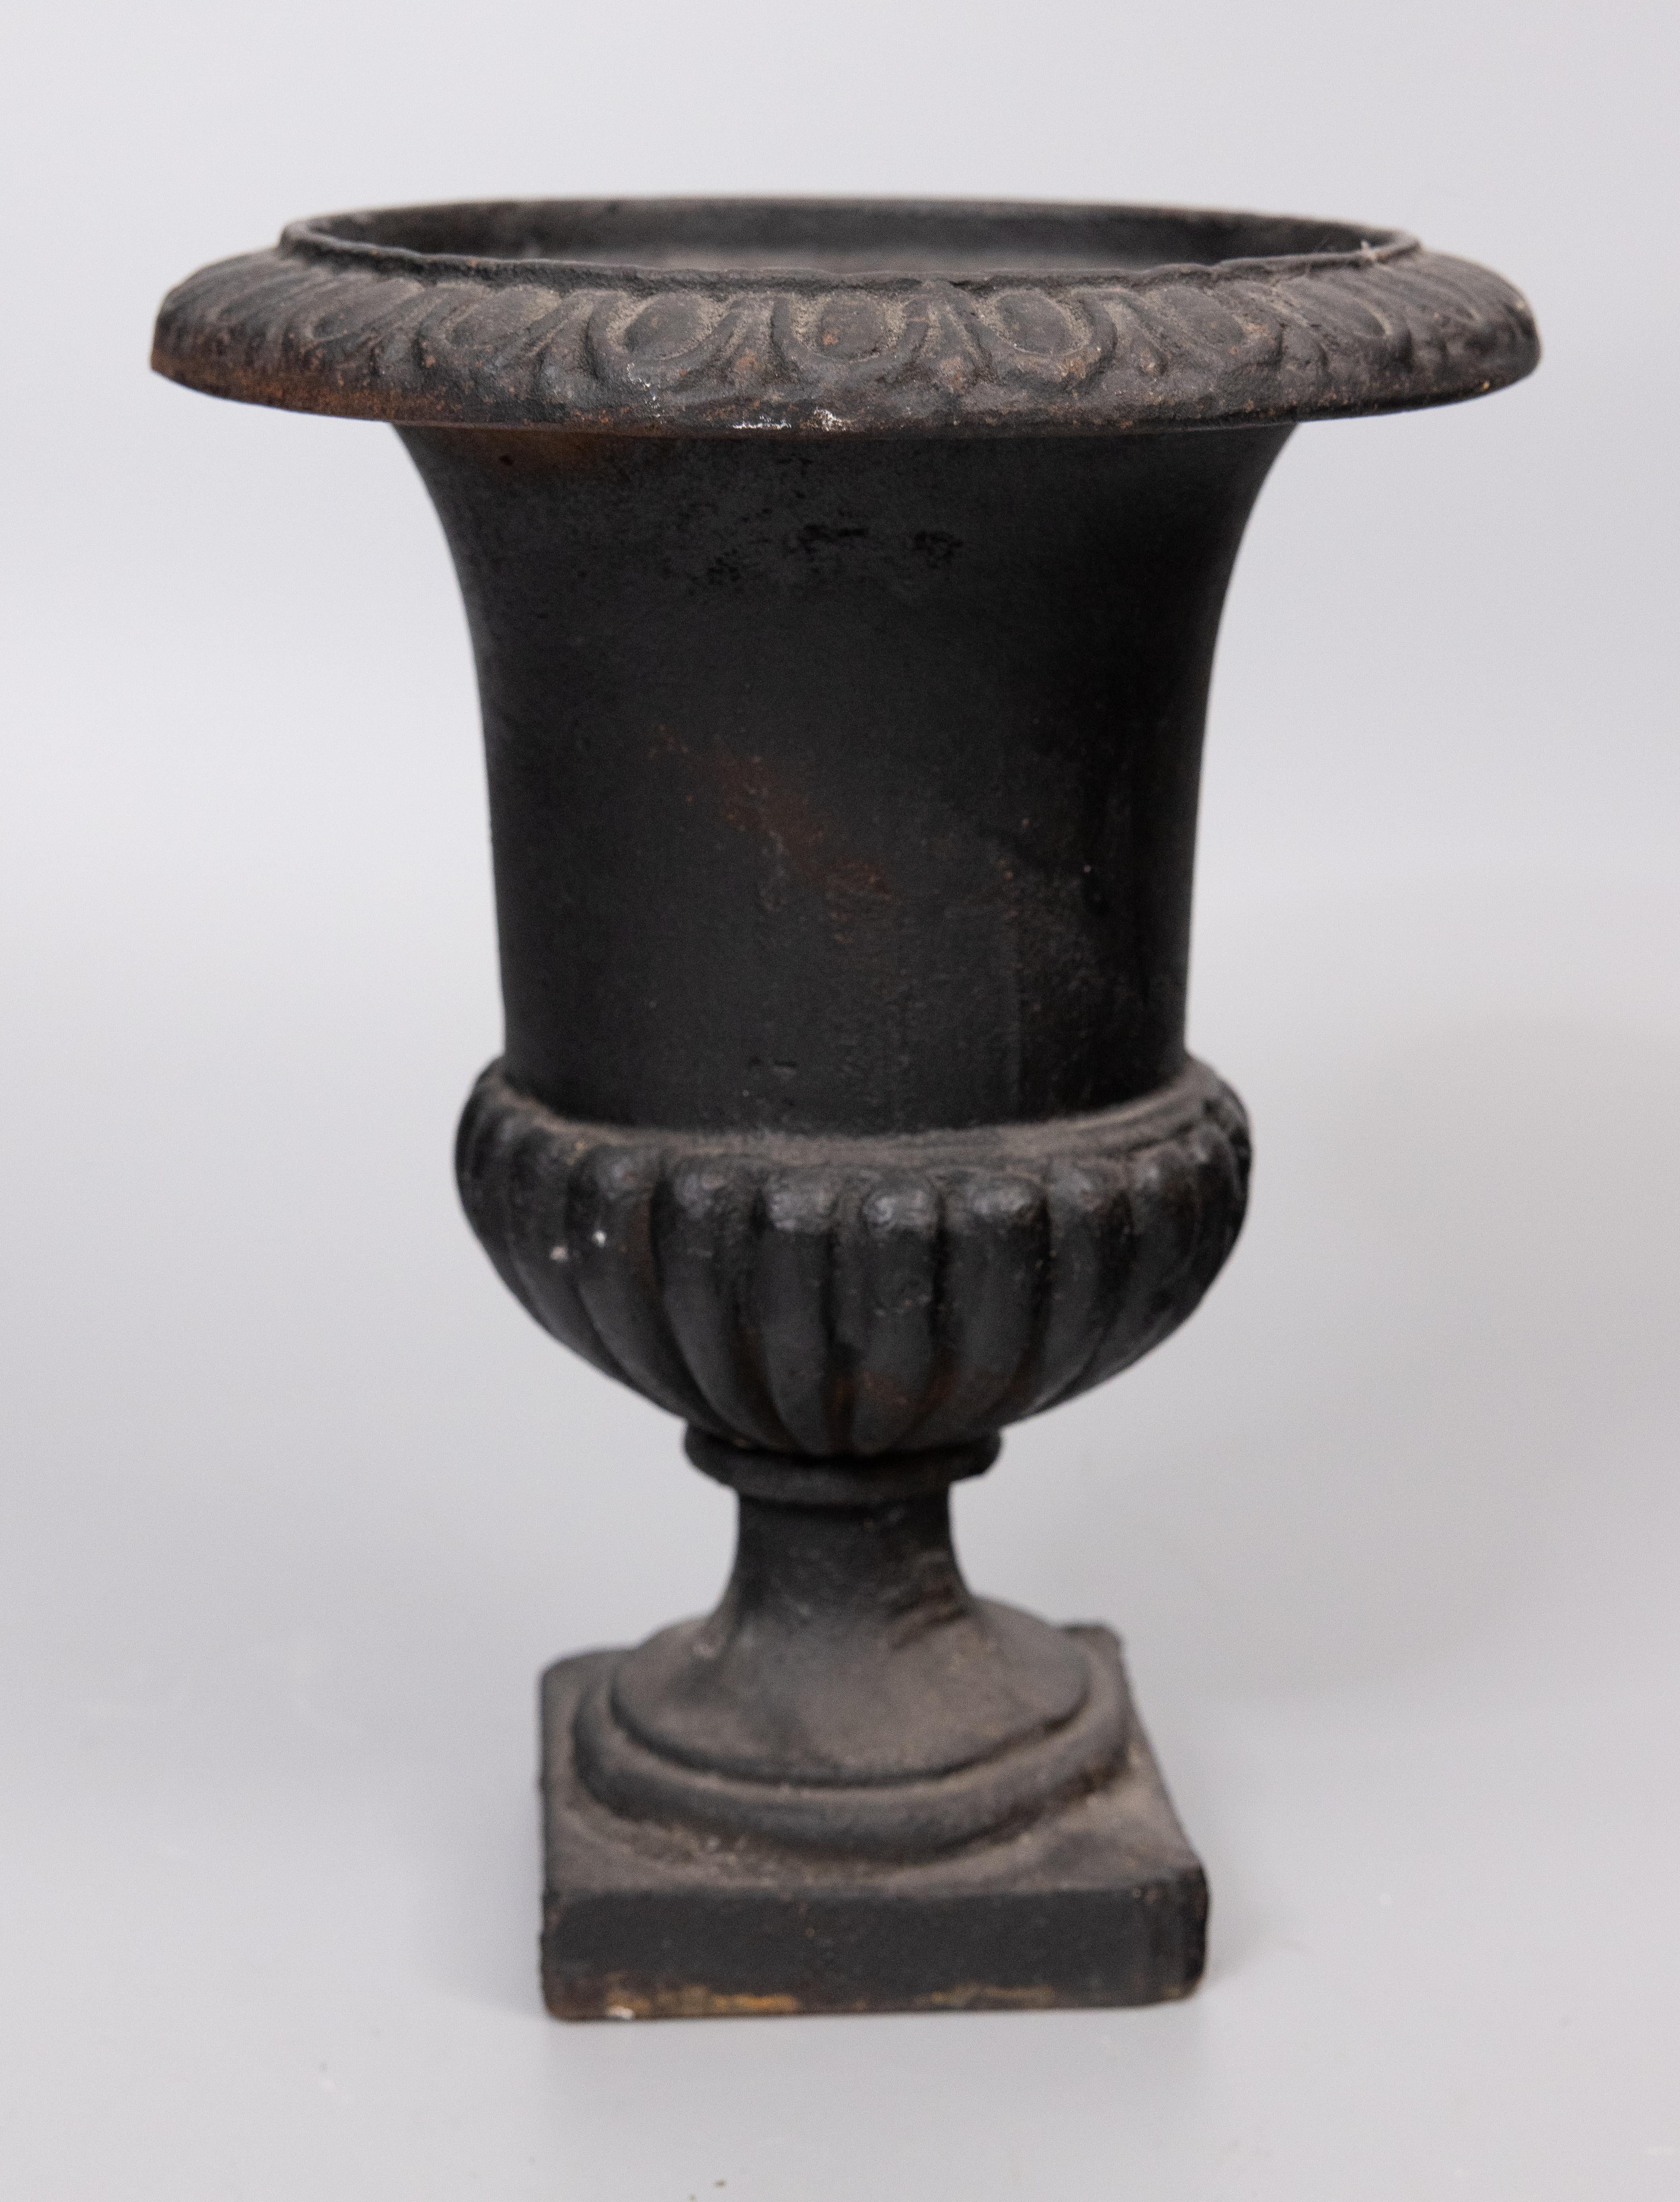 A stylish antique early 20th-century French neoclassical style cast iron urn or planter. This fine jardiniere is solid and heavy with a lovely patina, and would be lovely displayed indoors or outdoors.

DIMENSIONS
8.5